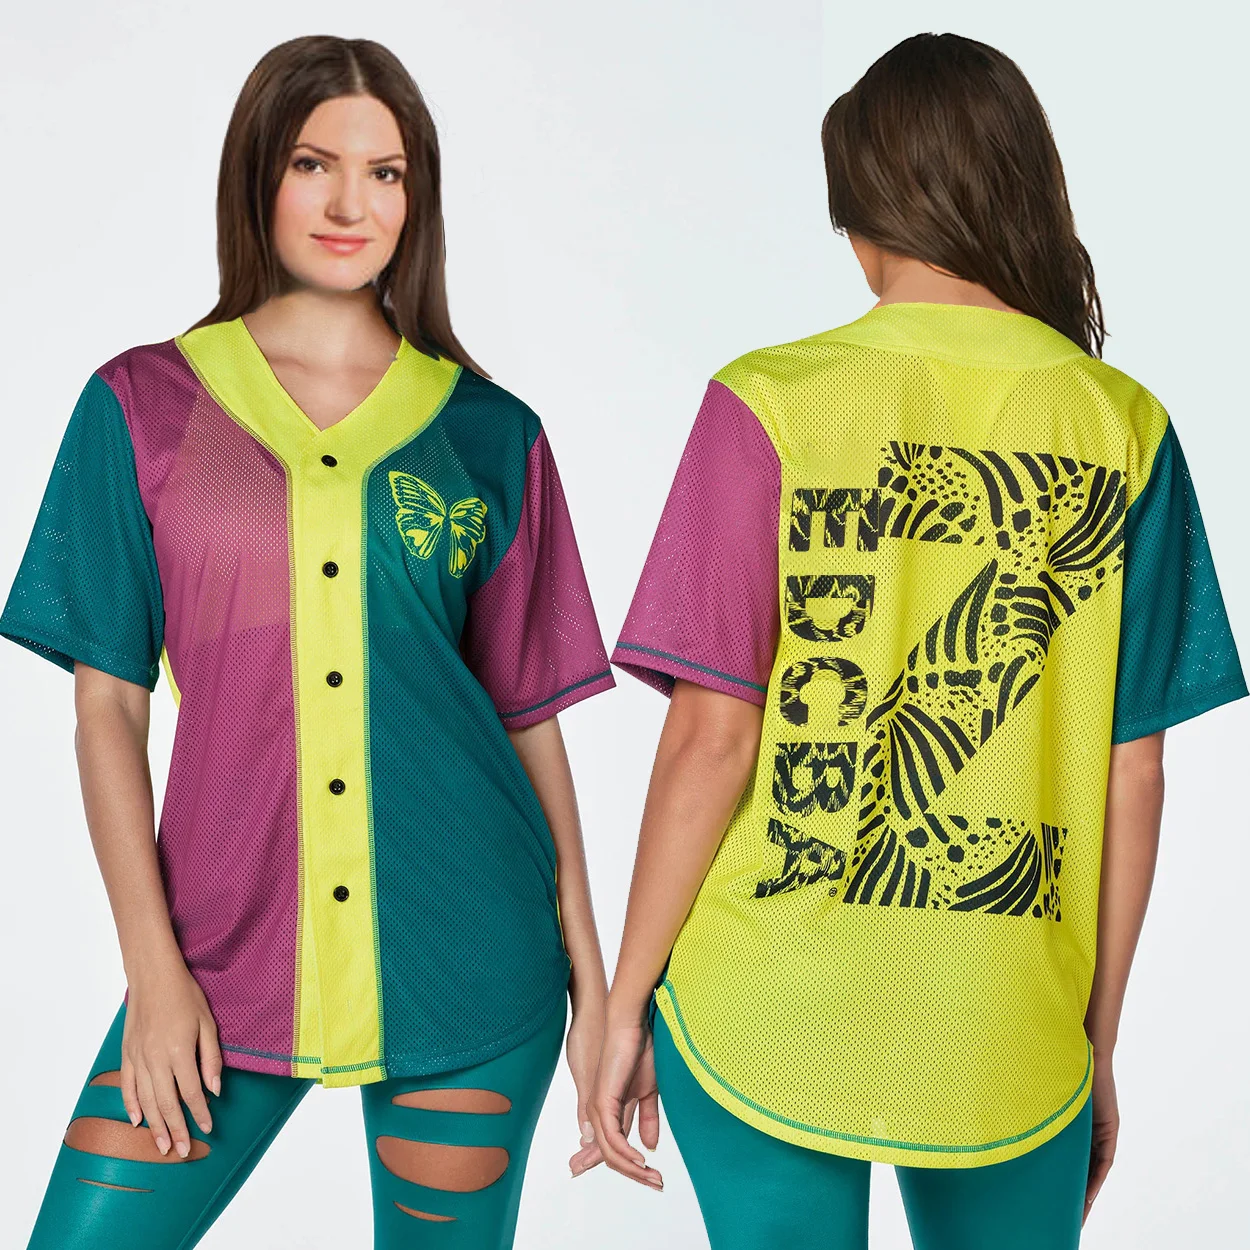 

ABCDE New arrival hot sell wear shirt top women clothes yellow green purple mesh joint top 0459